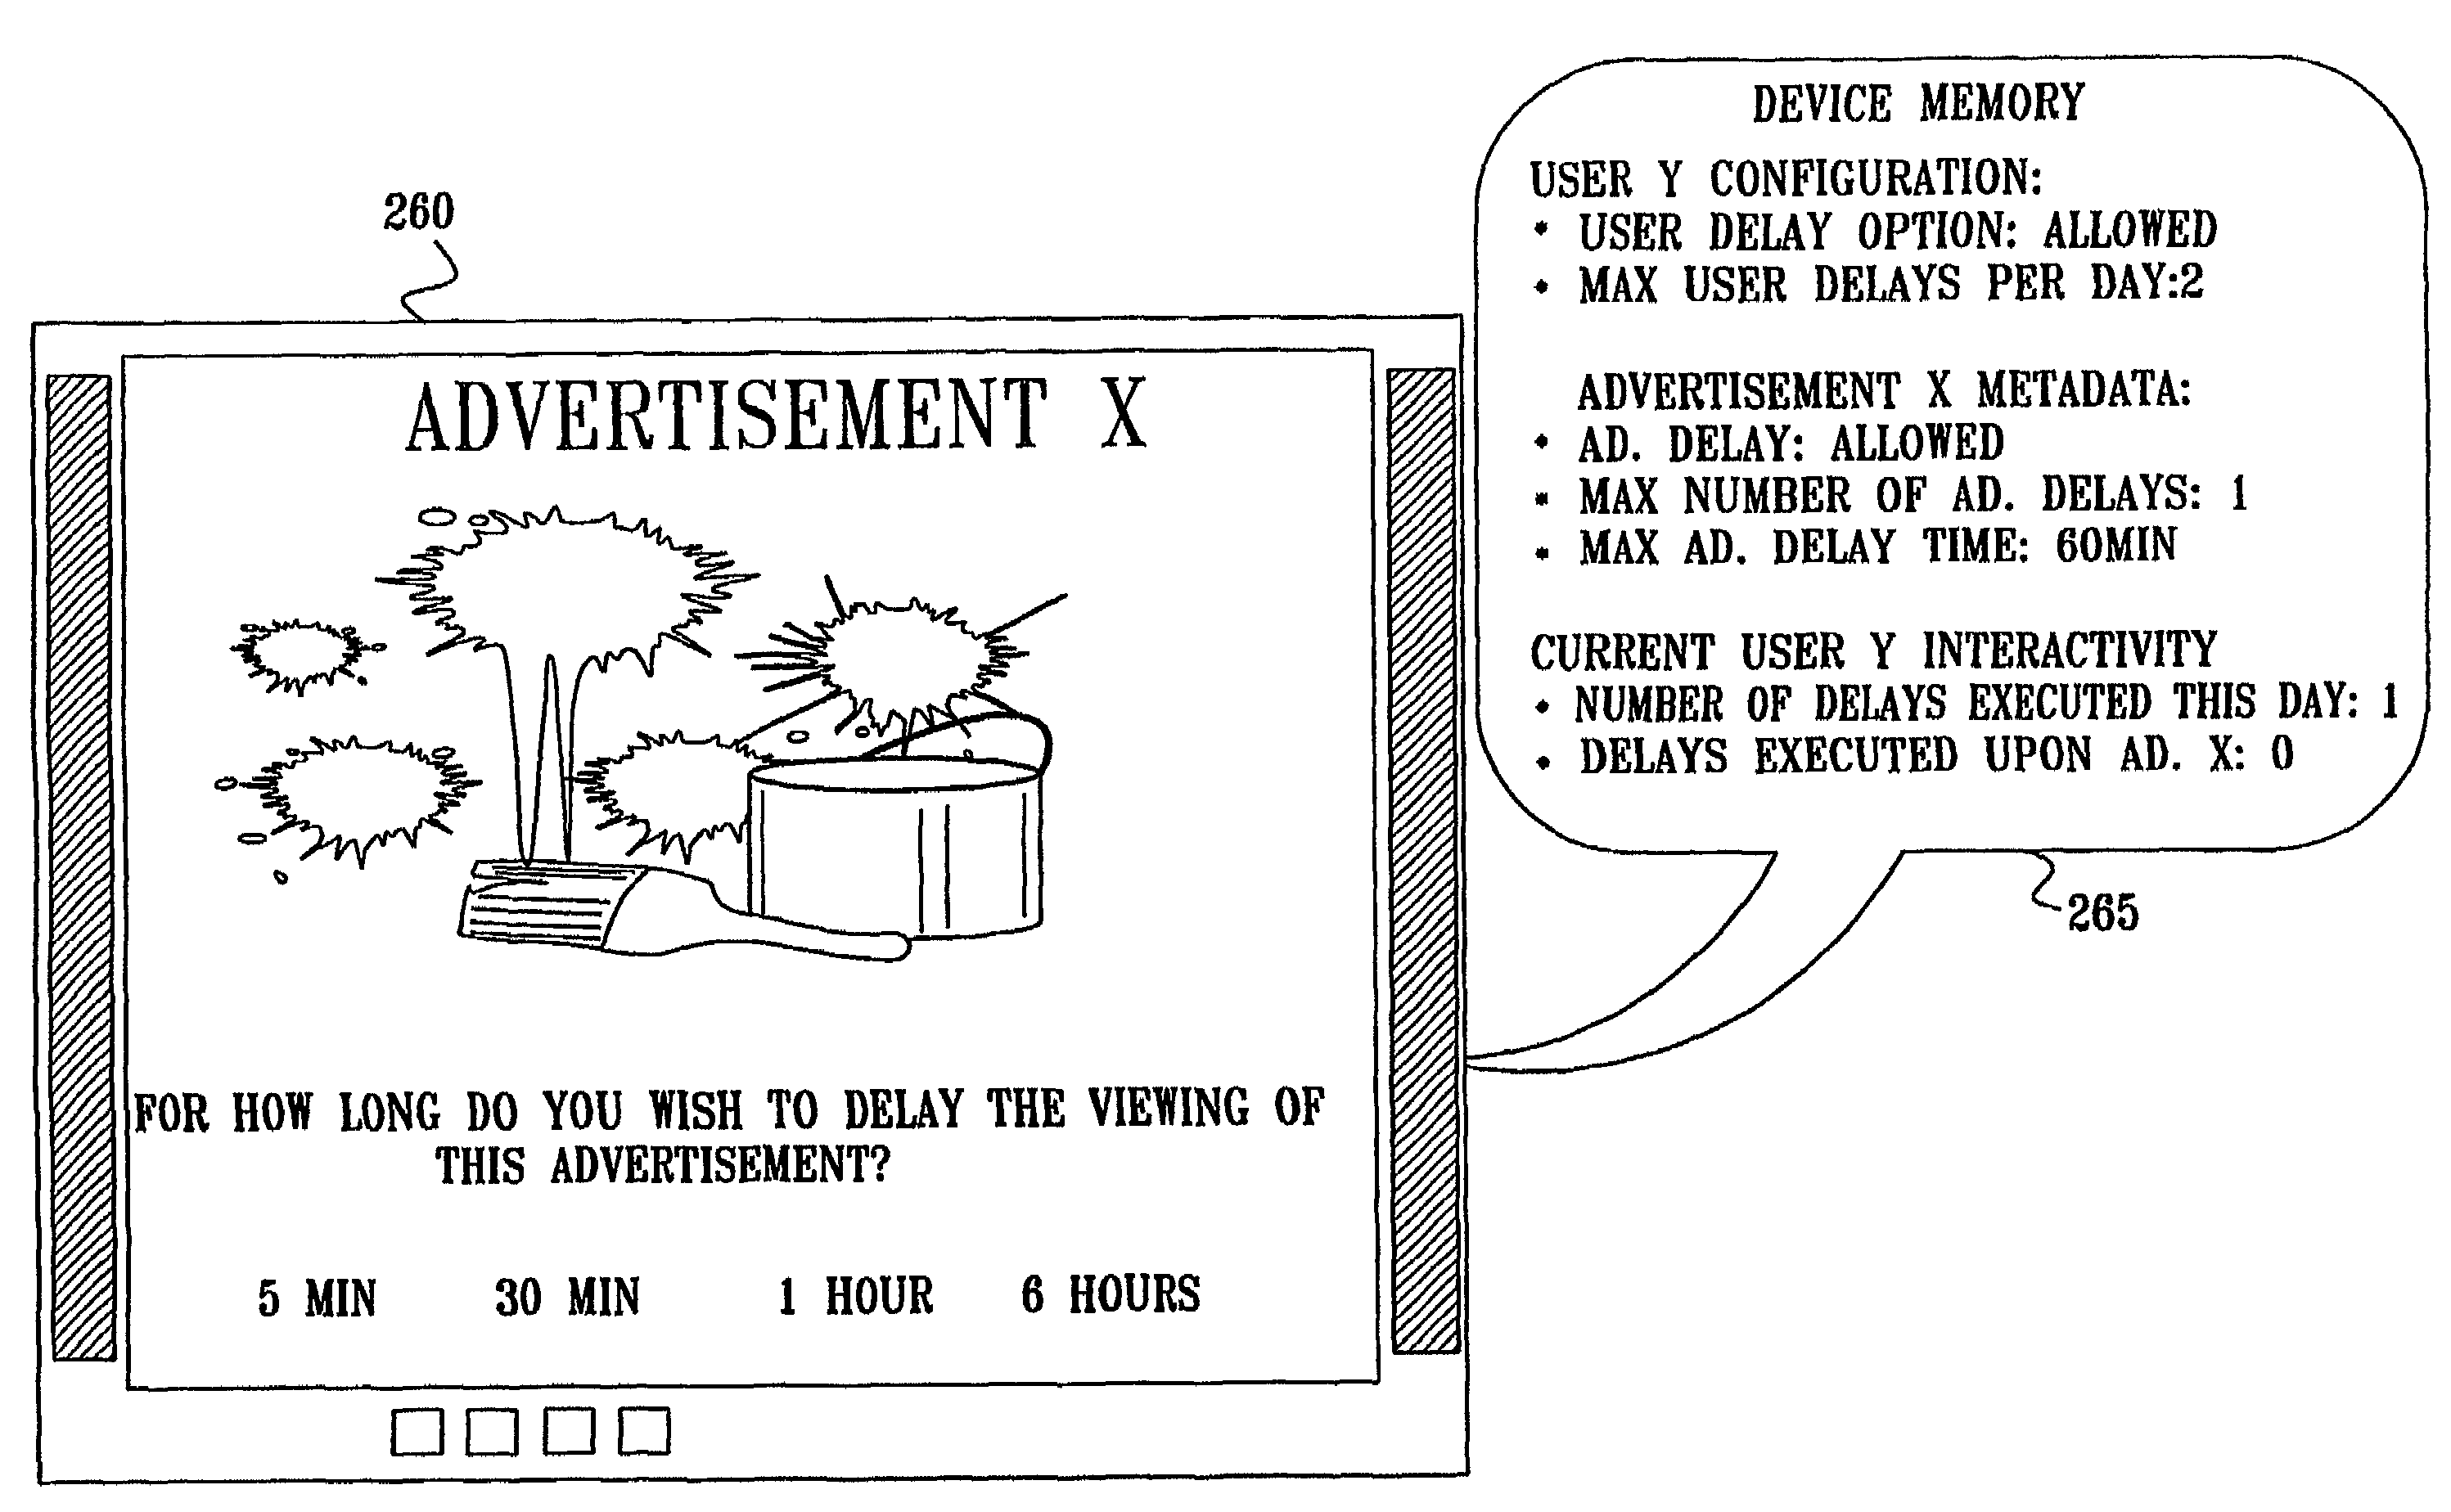 Advertisements in an end-user controlled playback environment